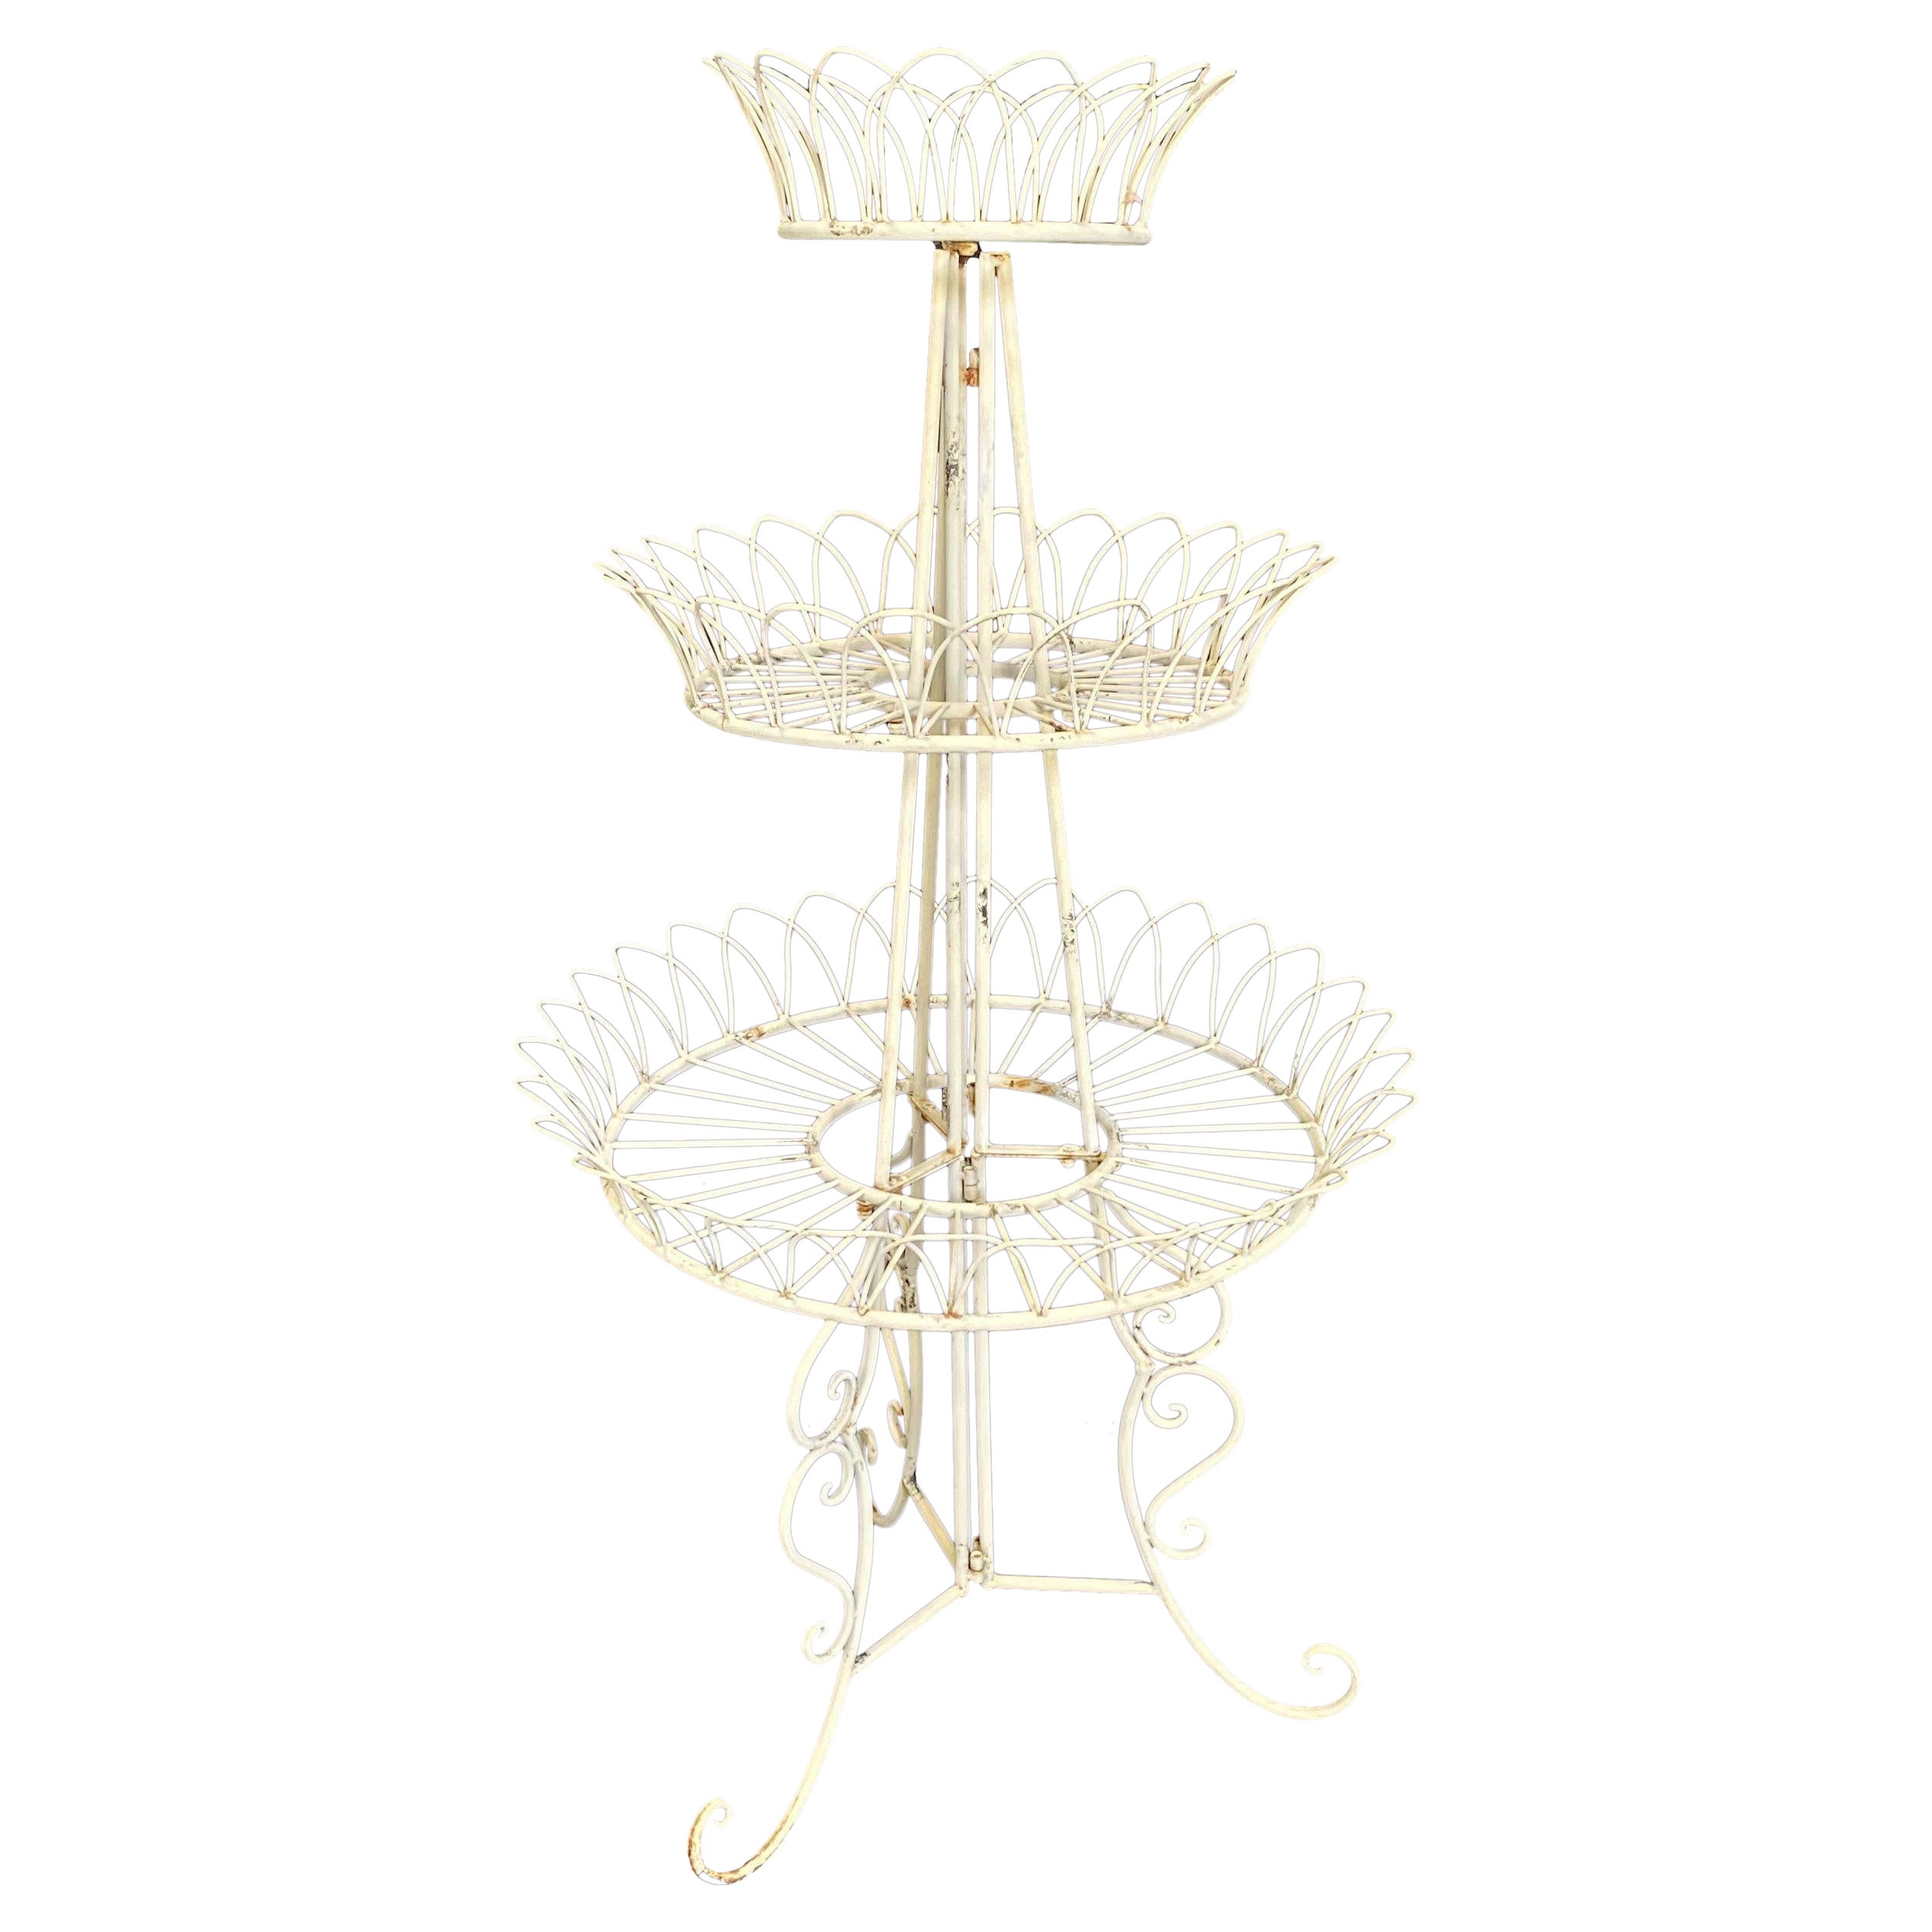 Romantic French Round Three Tier Painted Iron Wire Plant Stand